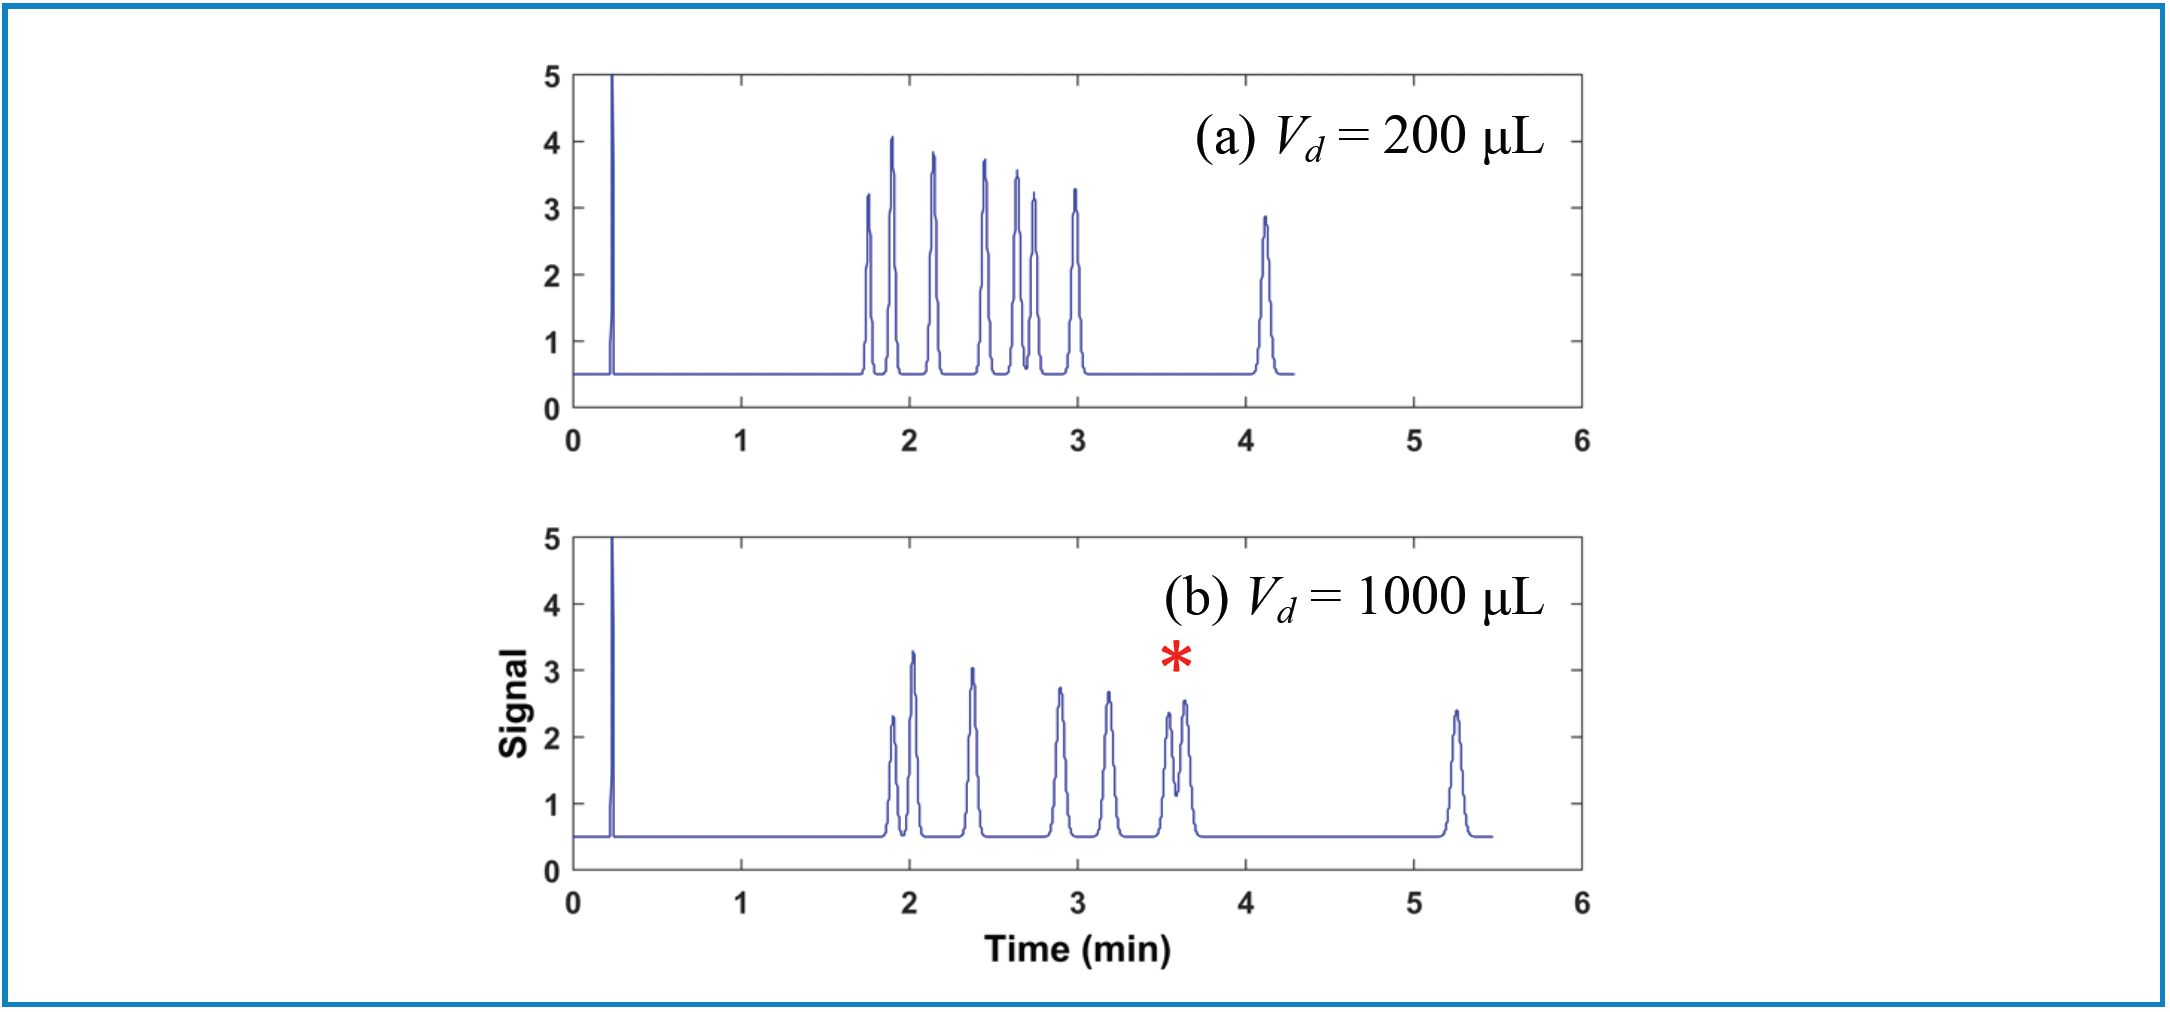 FIGURE 1: (a) Vd = 200 μL and (b) Vd = 1000 μL. Comparison of separations for a mixture of small molecules obtained on systems with different GDVs. Chromatograms are simulated (www.multidlc.org/hplcsim) using the following parameters: Stationary phase, C18; Column dimensions, 50 mm × 2.1 mm i.d. (1.8 μm particle size); Flow rate, 0.4 mL/min.; Temperature, 40 °C; Gradient elution from 20–45% B from 0–6 min.; (a) solvent, water; (b) solvent, acetonitrile. The red asterisk indicates ethylparaben and nitrobenzene are coeluted. Other compounds are uracil, methylparaben, 3-phenylpropanol, benzonitrile, p chlorophenol, acetophenone, and propiophenone.